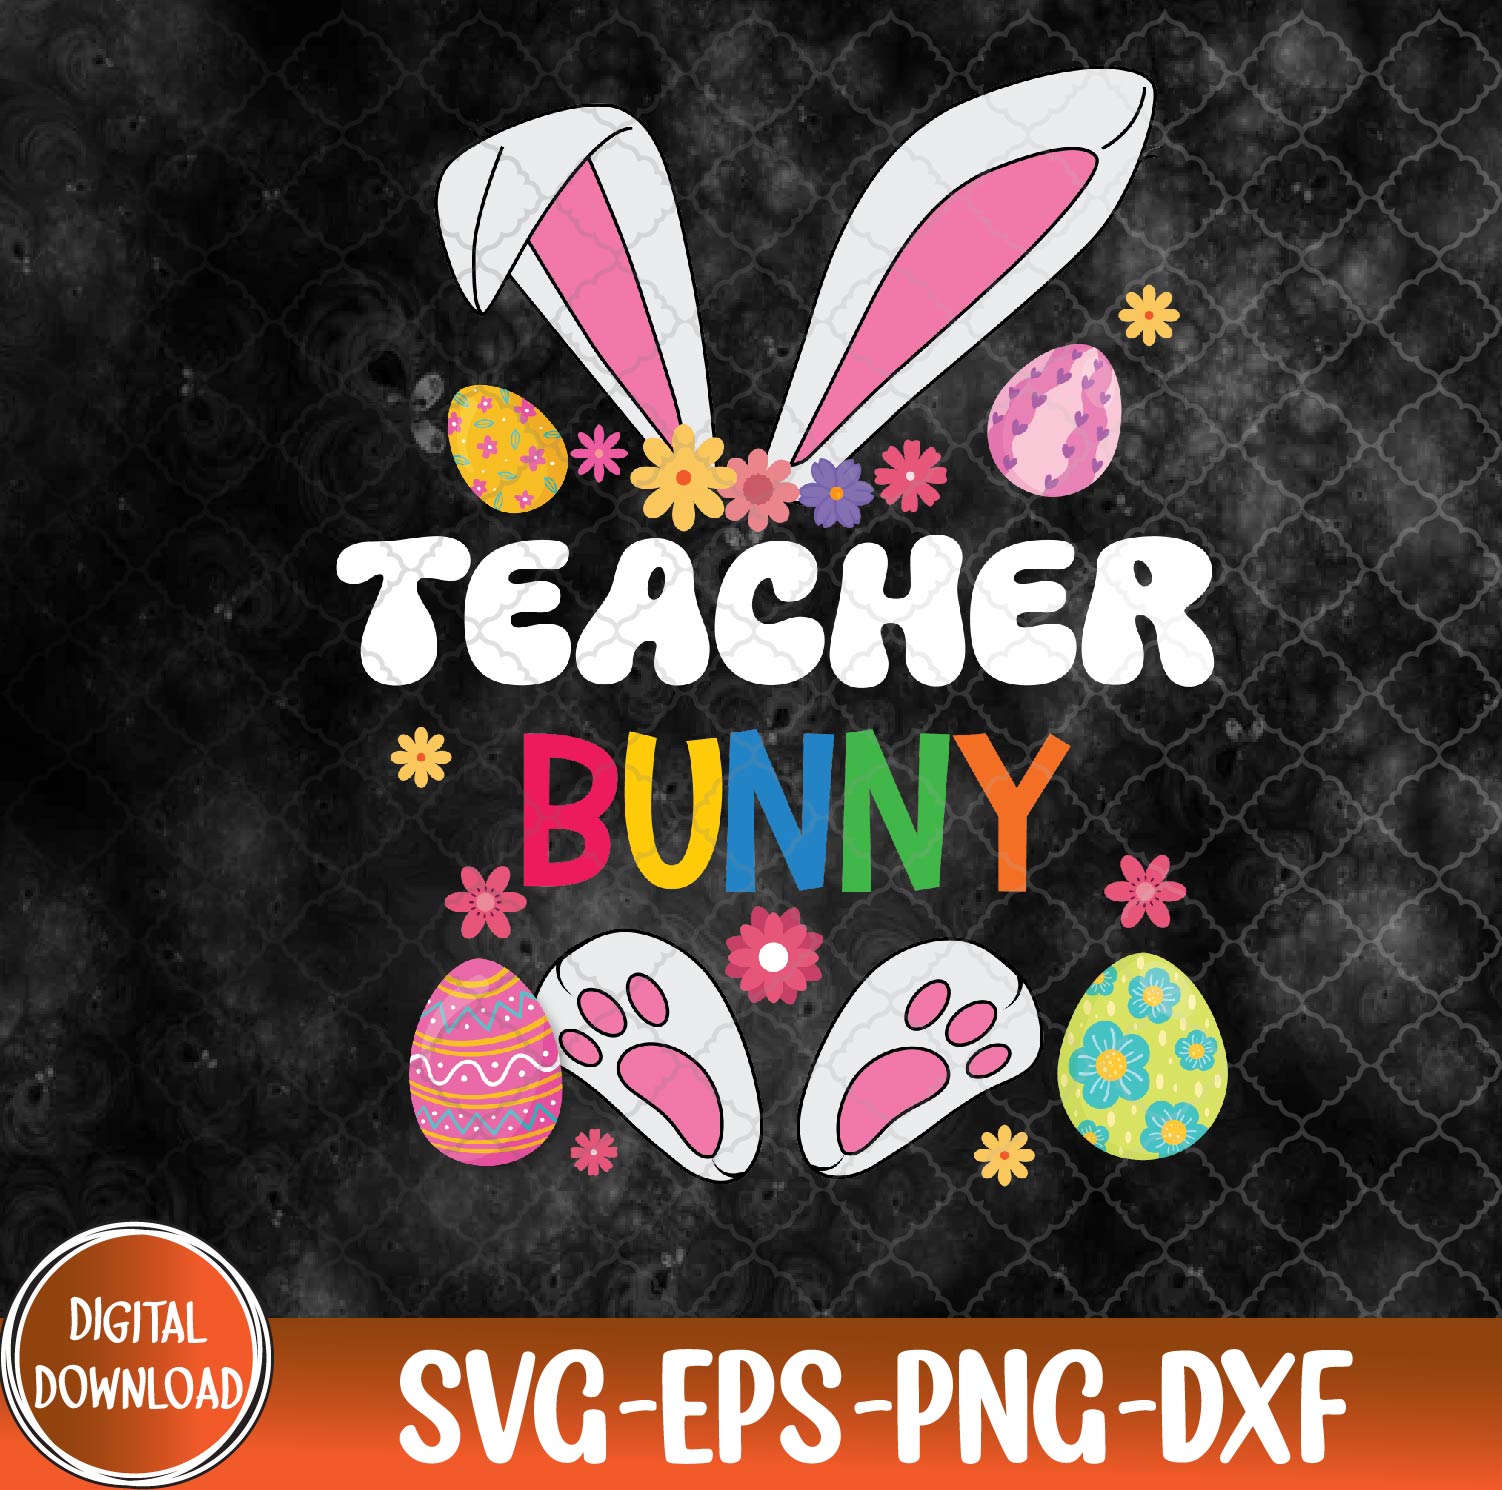 Forget The Bunnies I’m Chasing Hunnies Funny Easter Svg, Eps, Png, Dxf